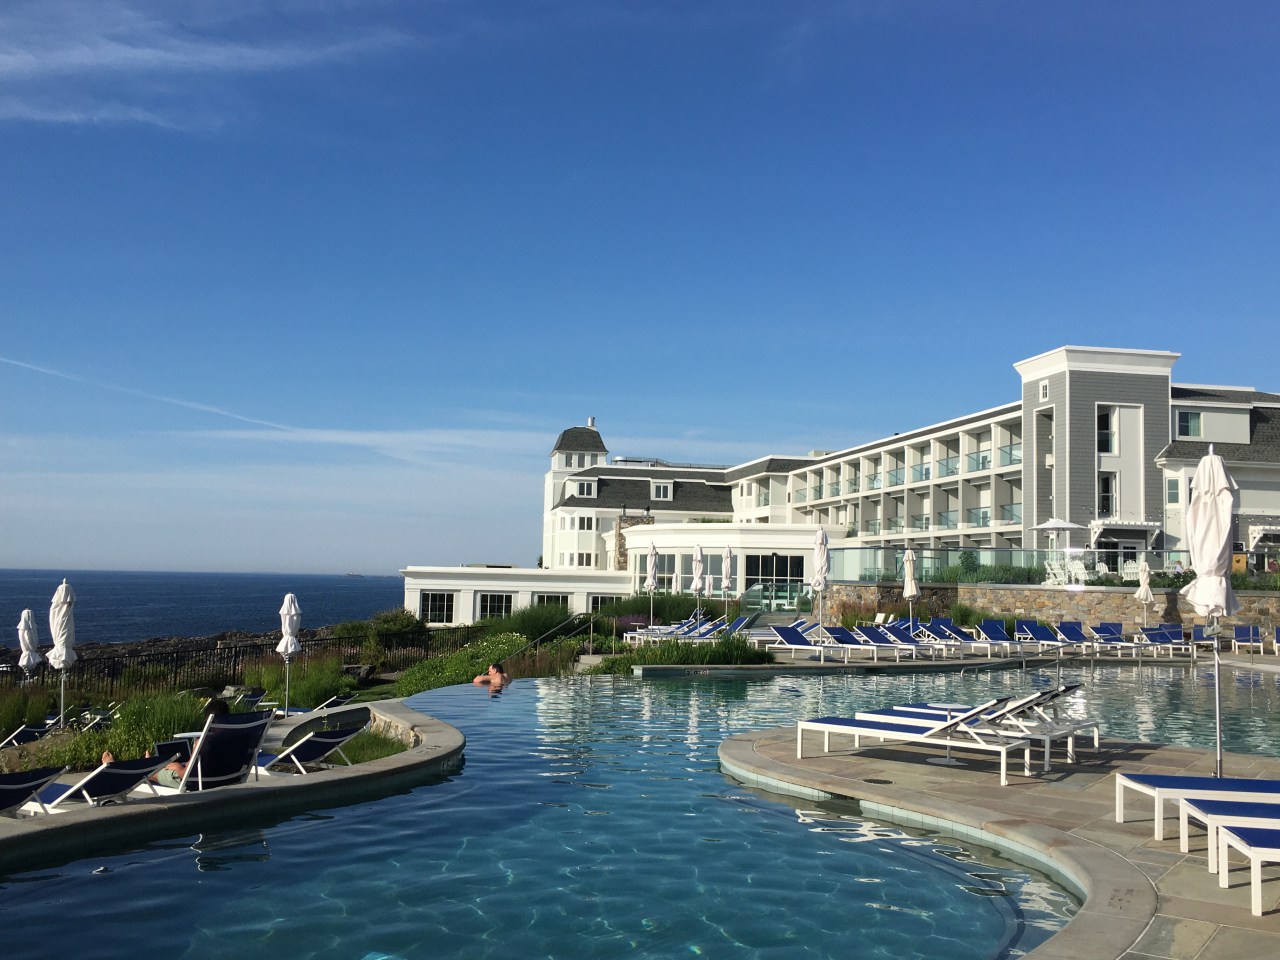 Resort Pool (Adult Pool), The Cliff House Maine